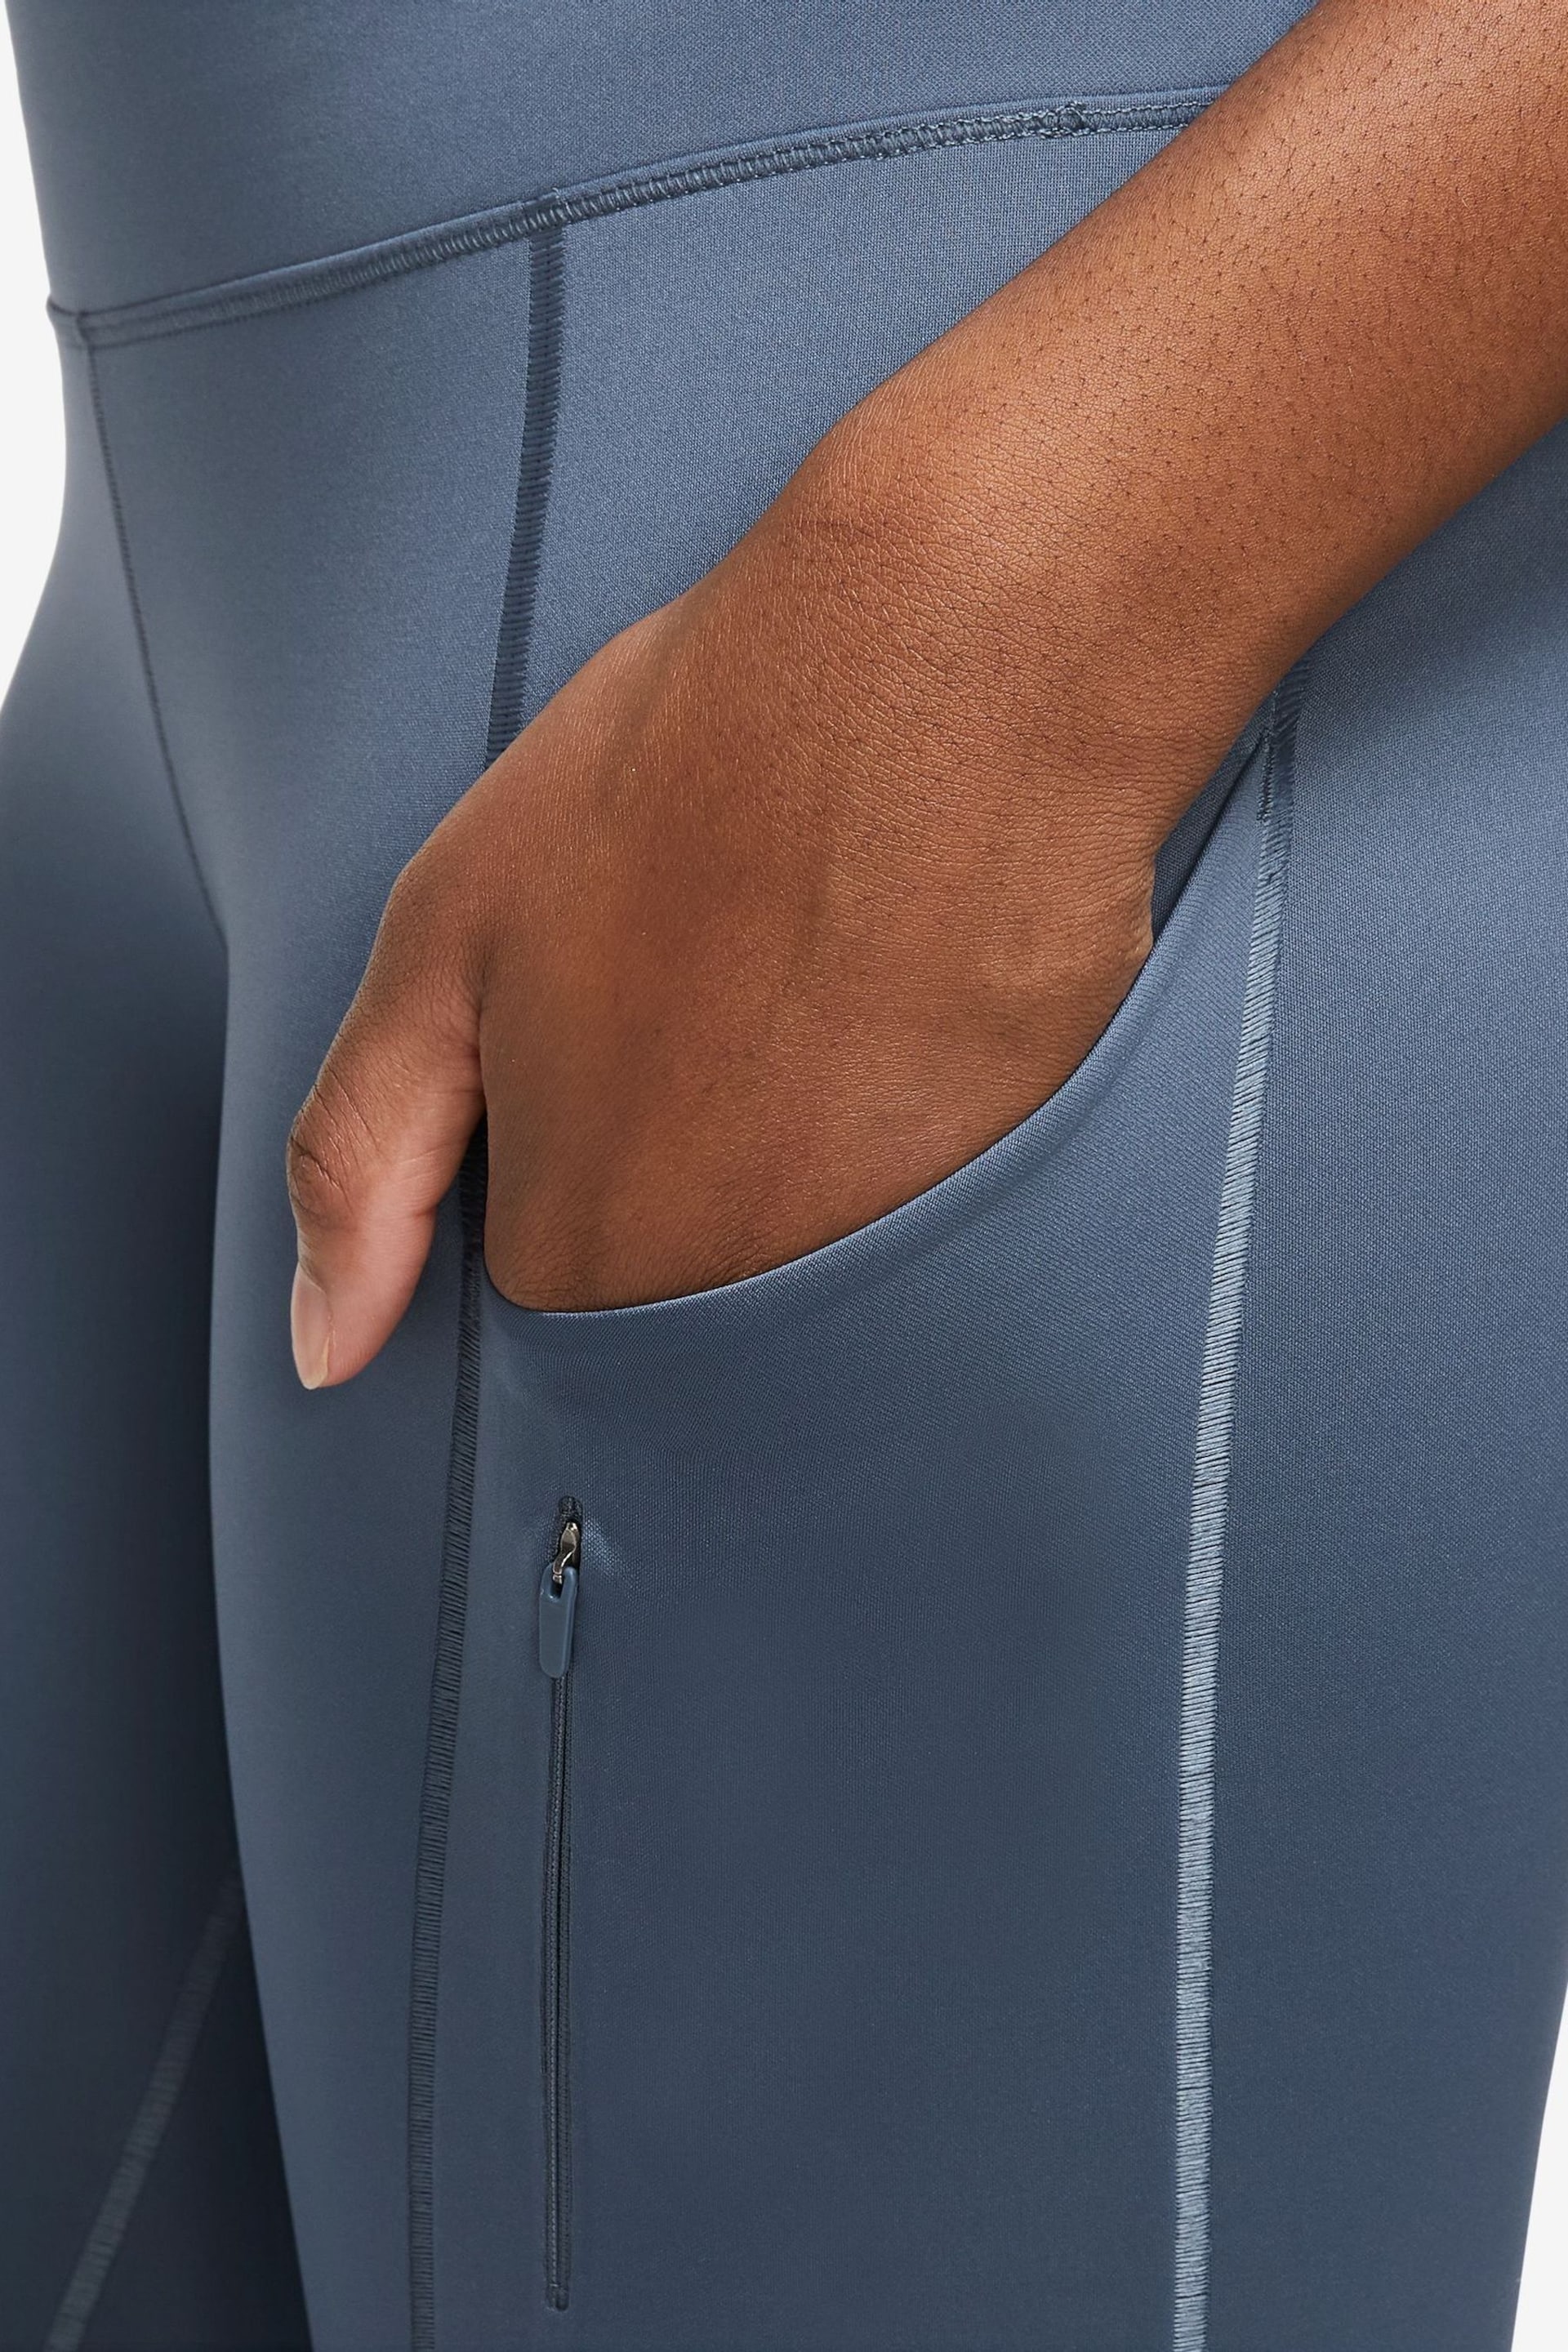 Nike Blue Go Firm-Support Mid-Rise 7/8 Leggings with Pockets - Image 3 of 4